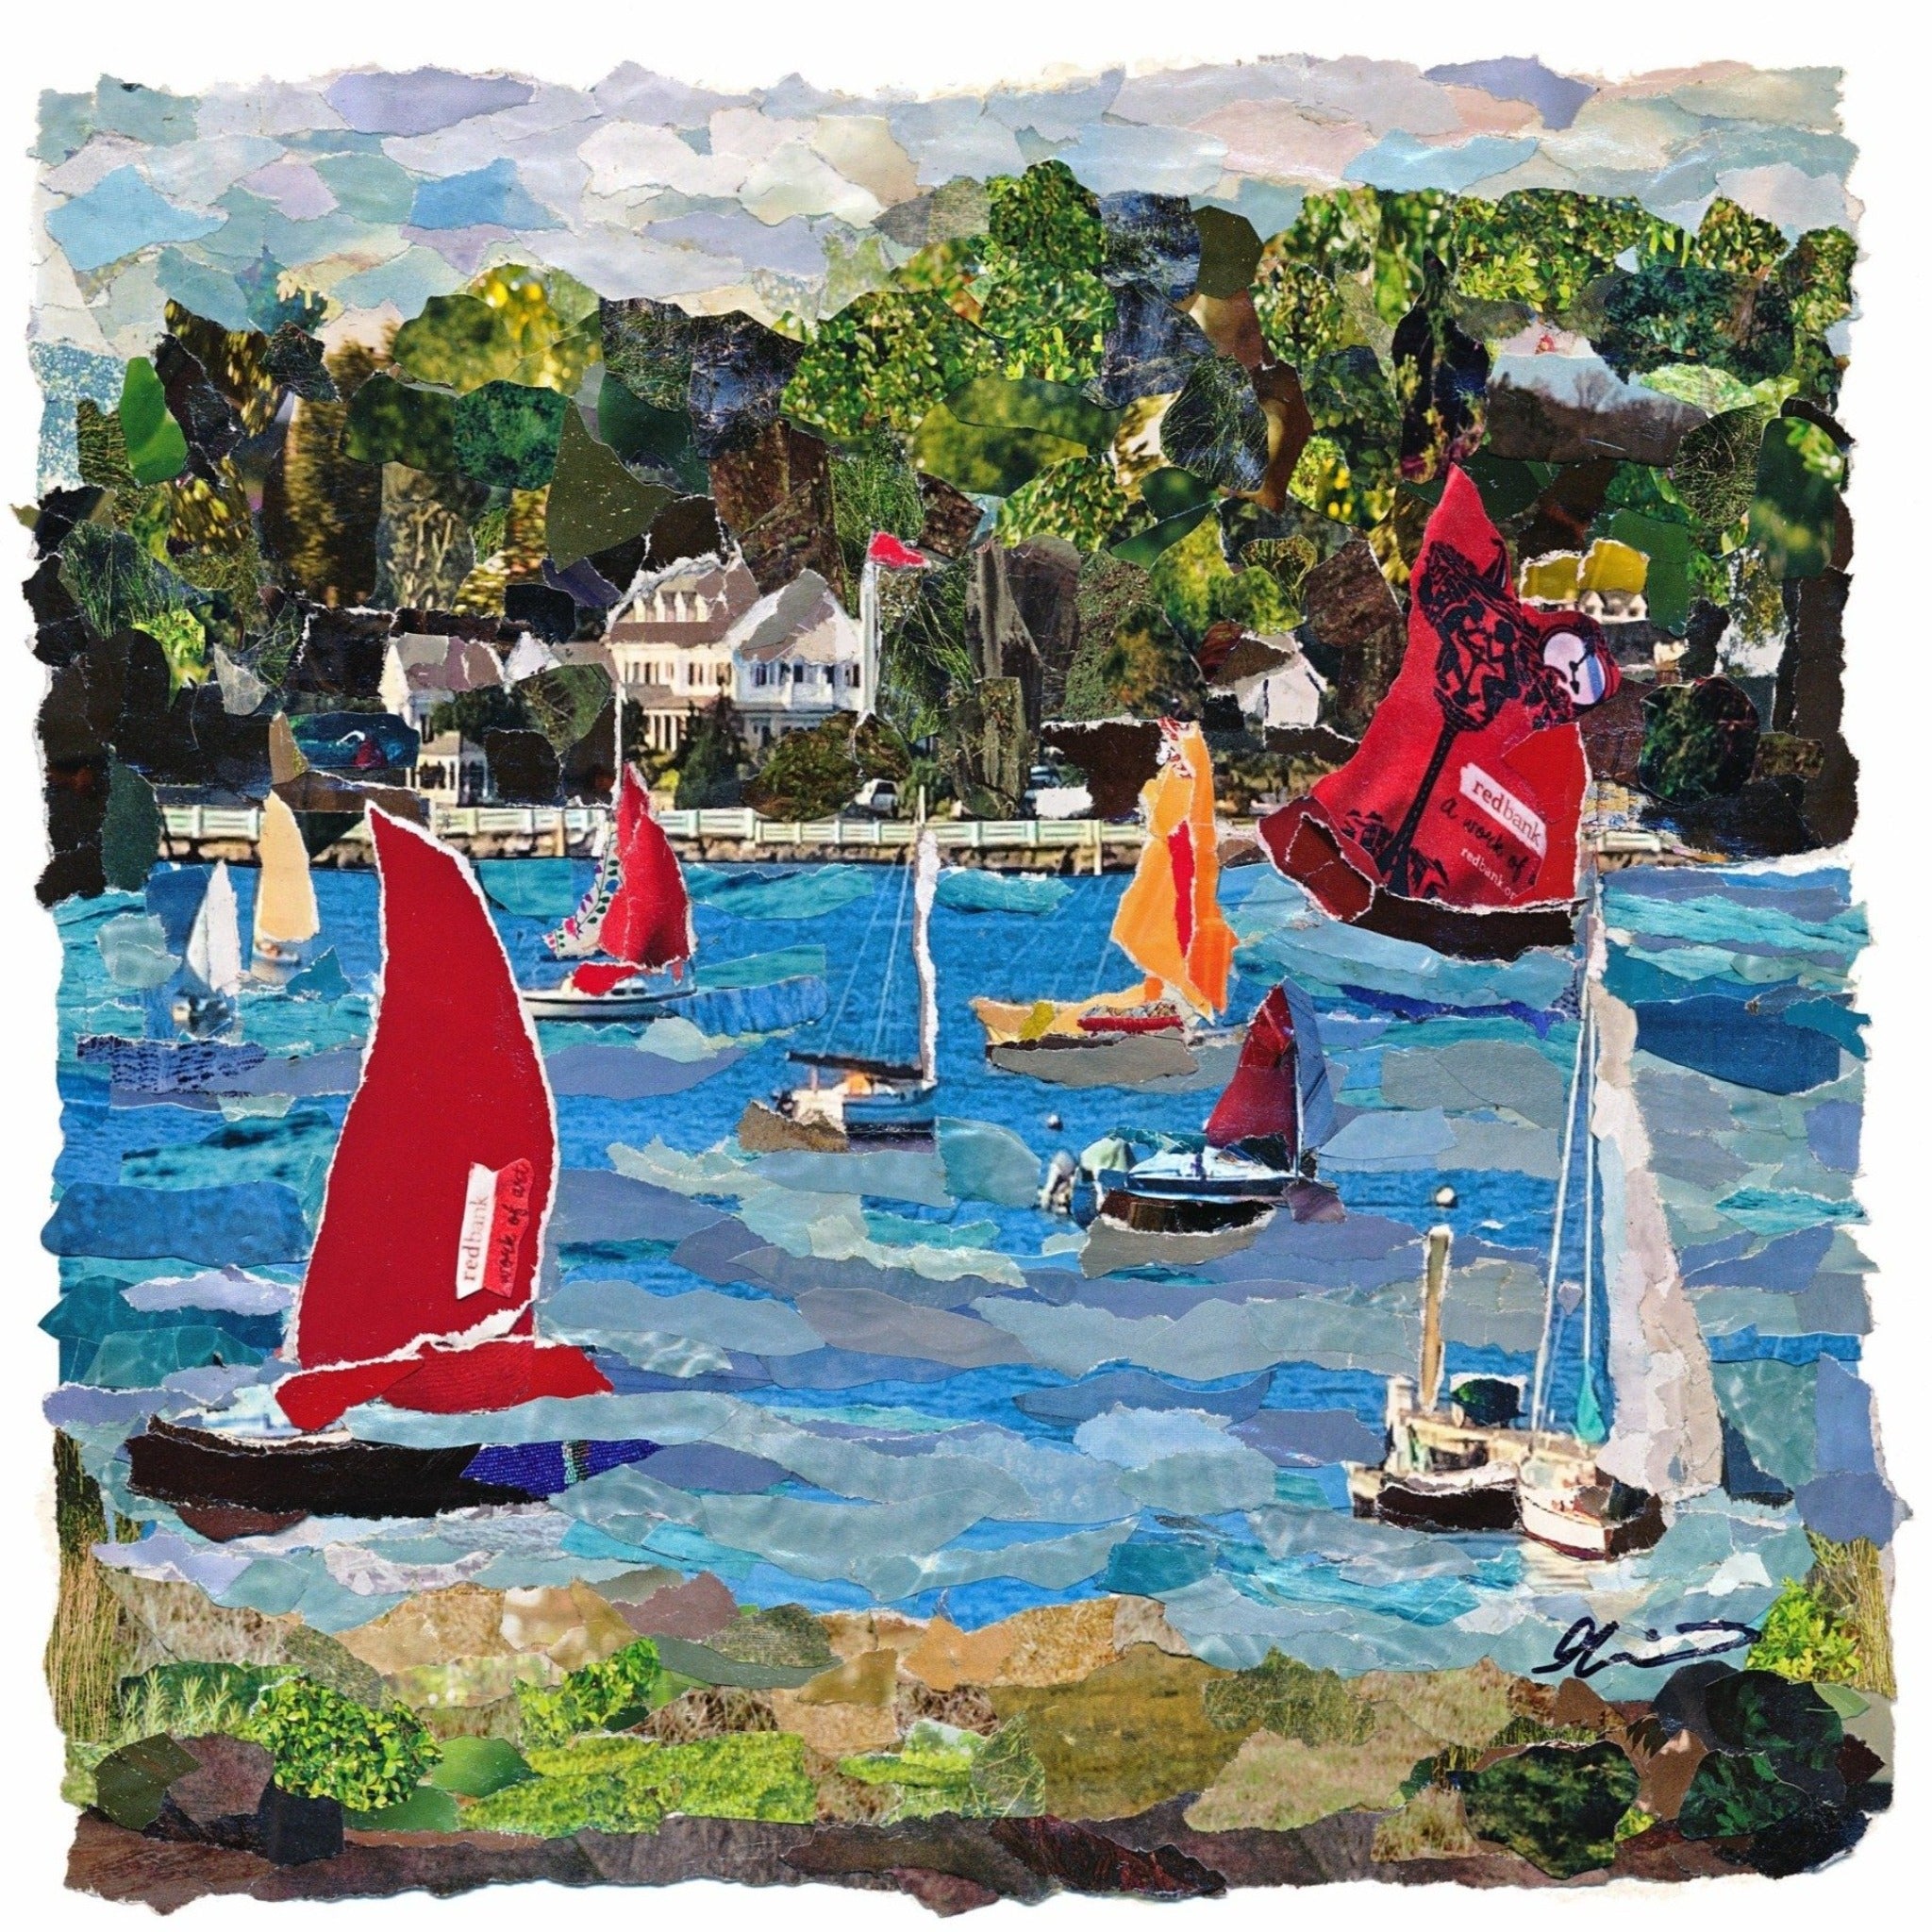 Maria Velez Red Sails on the Navesink artist from Red Bank